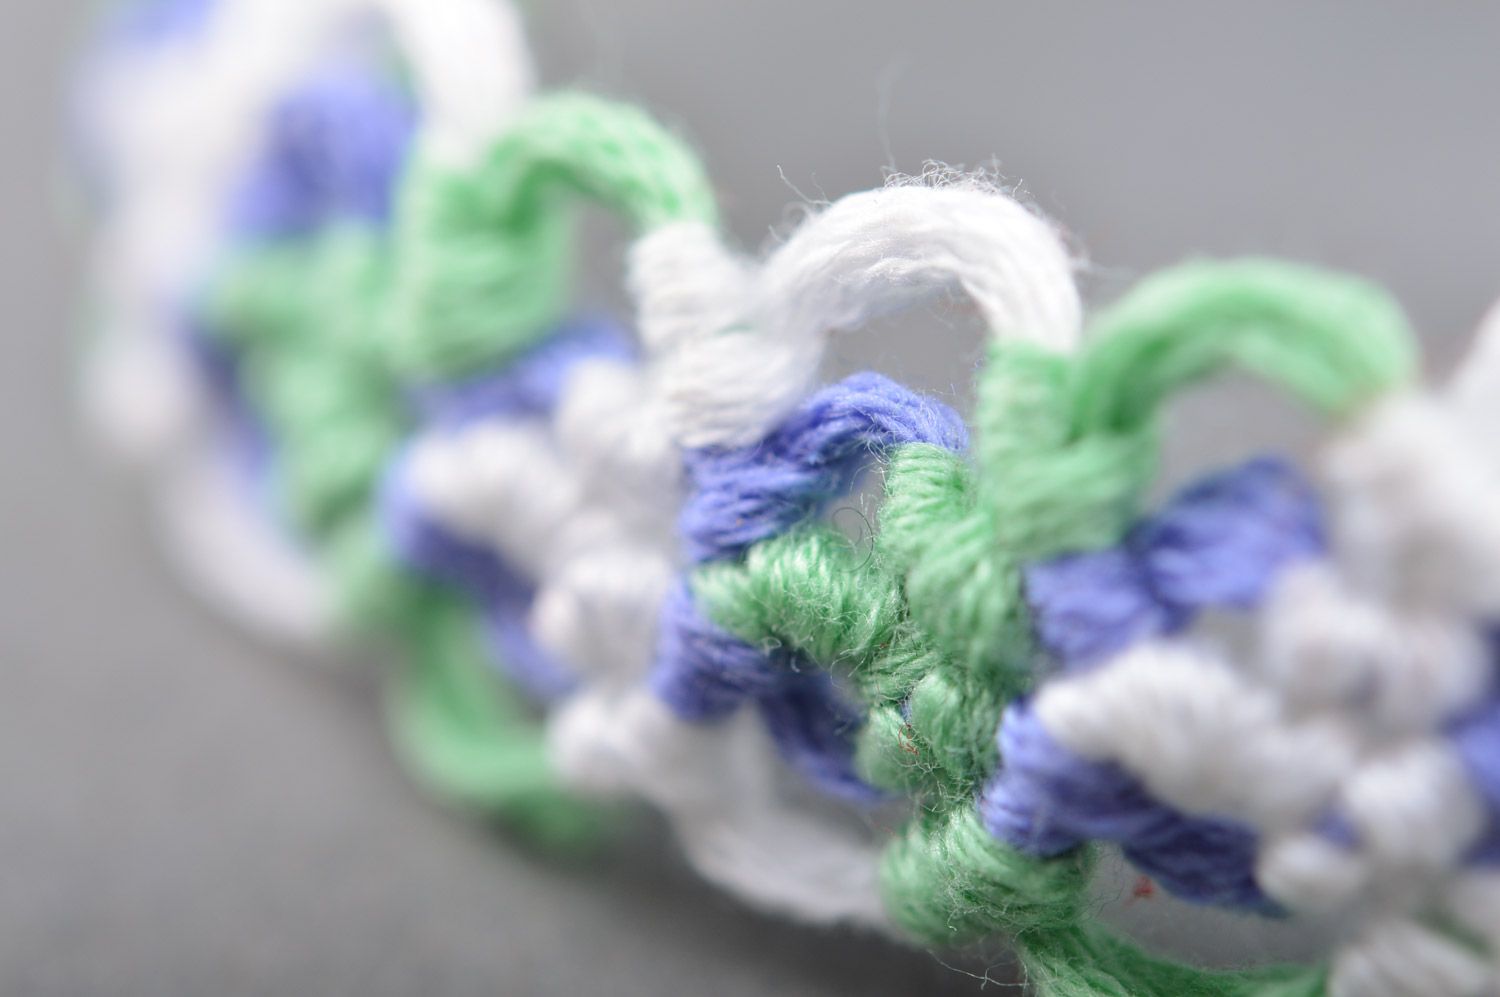 Thin handmade friendship wrist bracelet woven of embroidery floss in tender colors photo 4